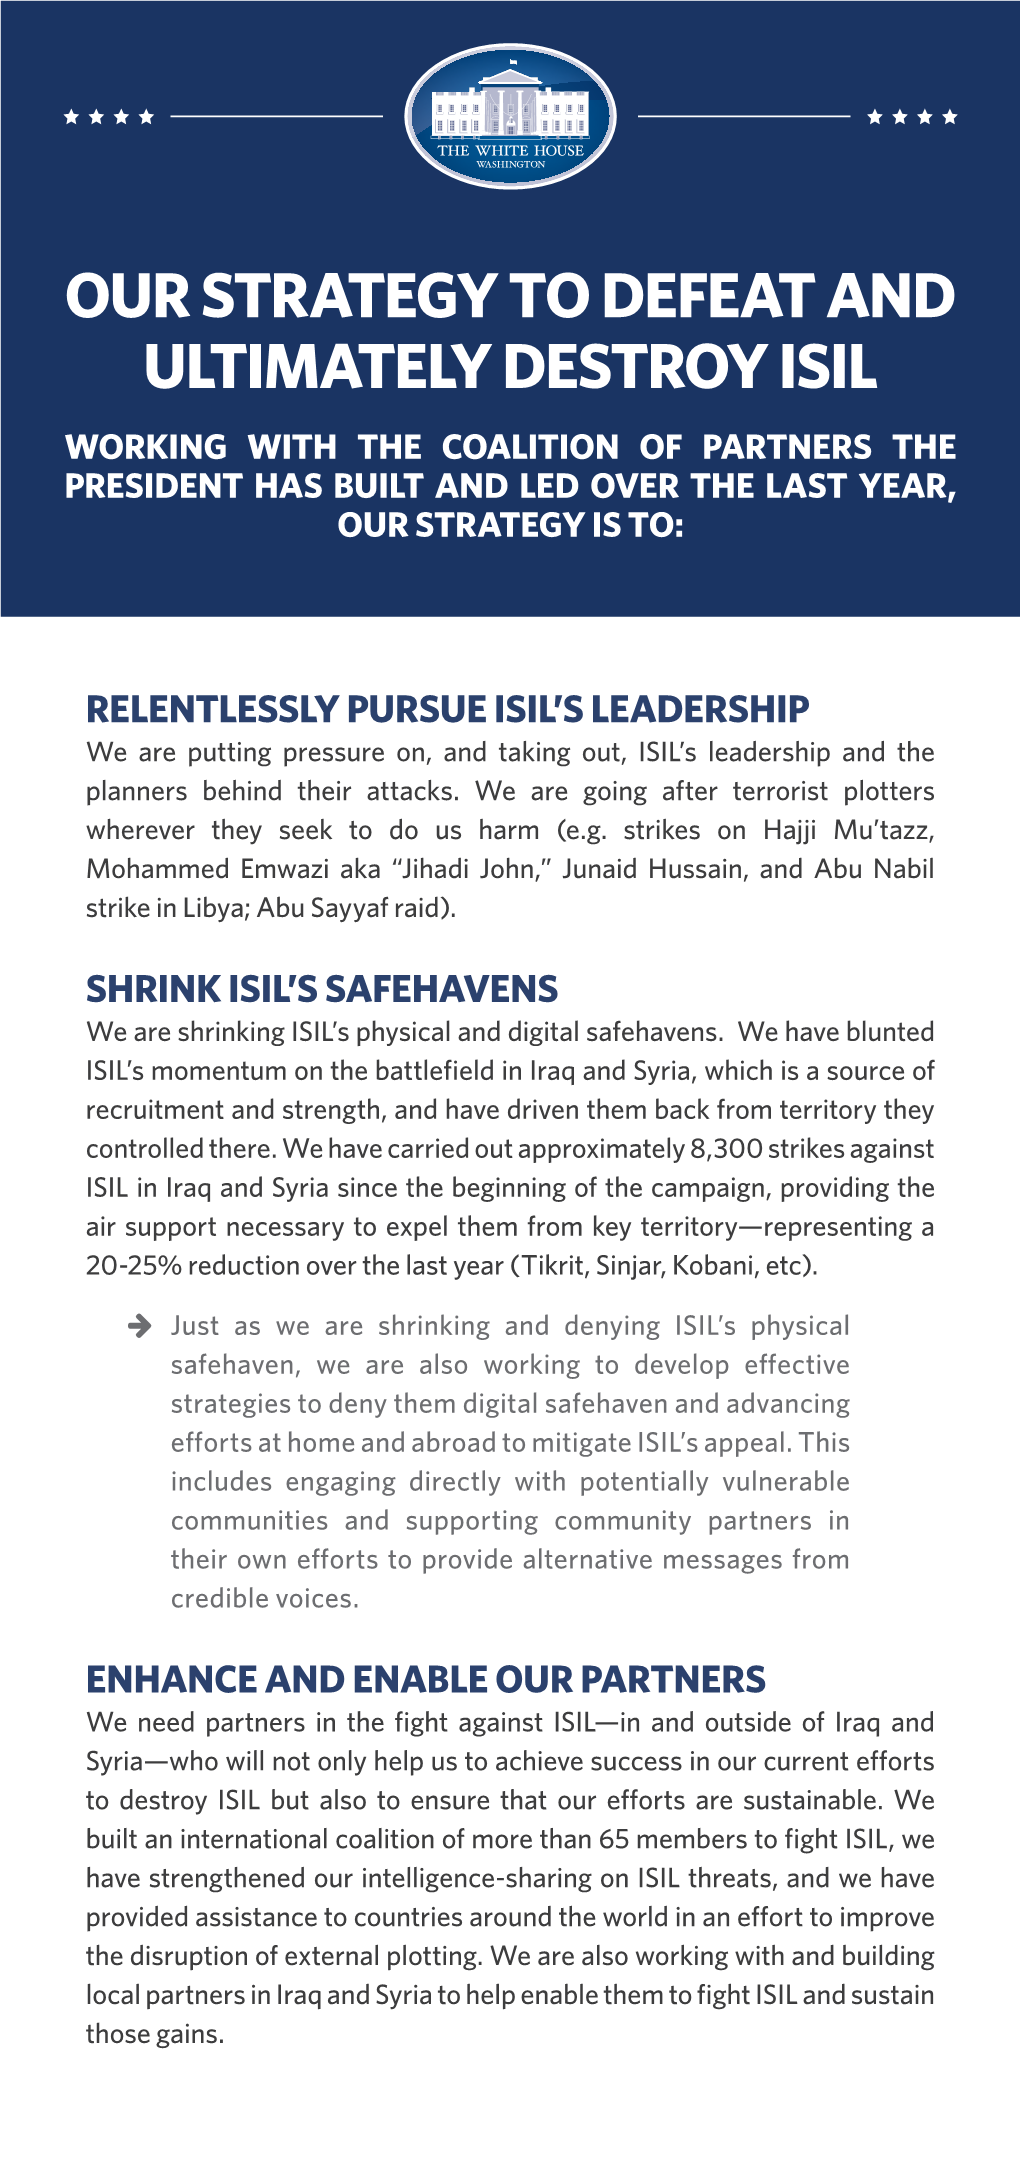 Our Strategy to Defeat and Ultimately Destroy Isil Working with the Coalition of Partners the President Has Built and Led Over the Last Year, Our Strategy Is To